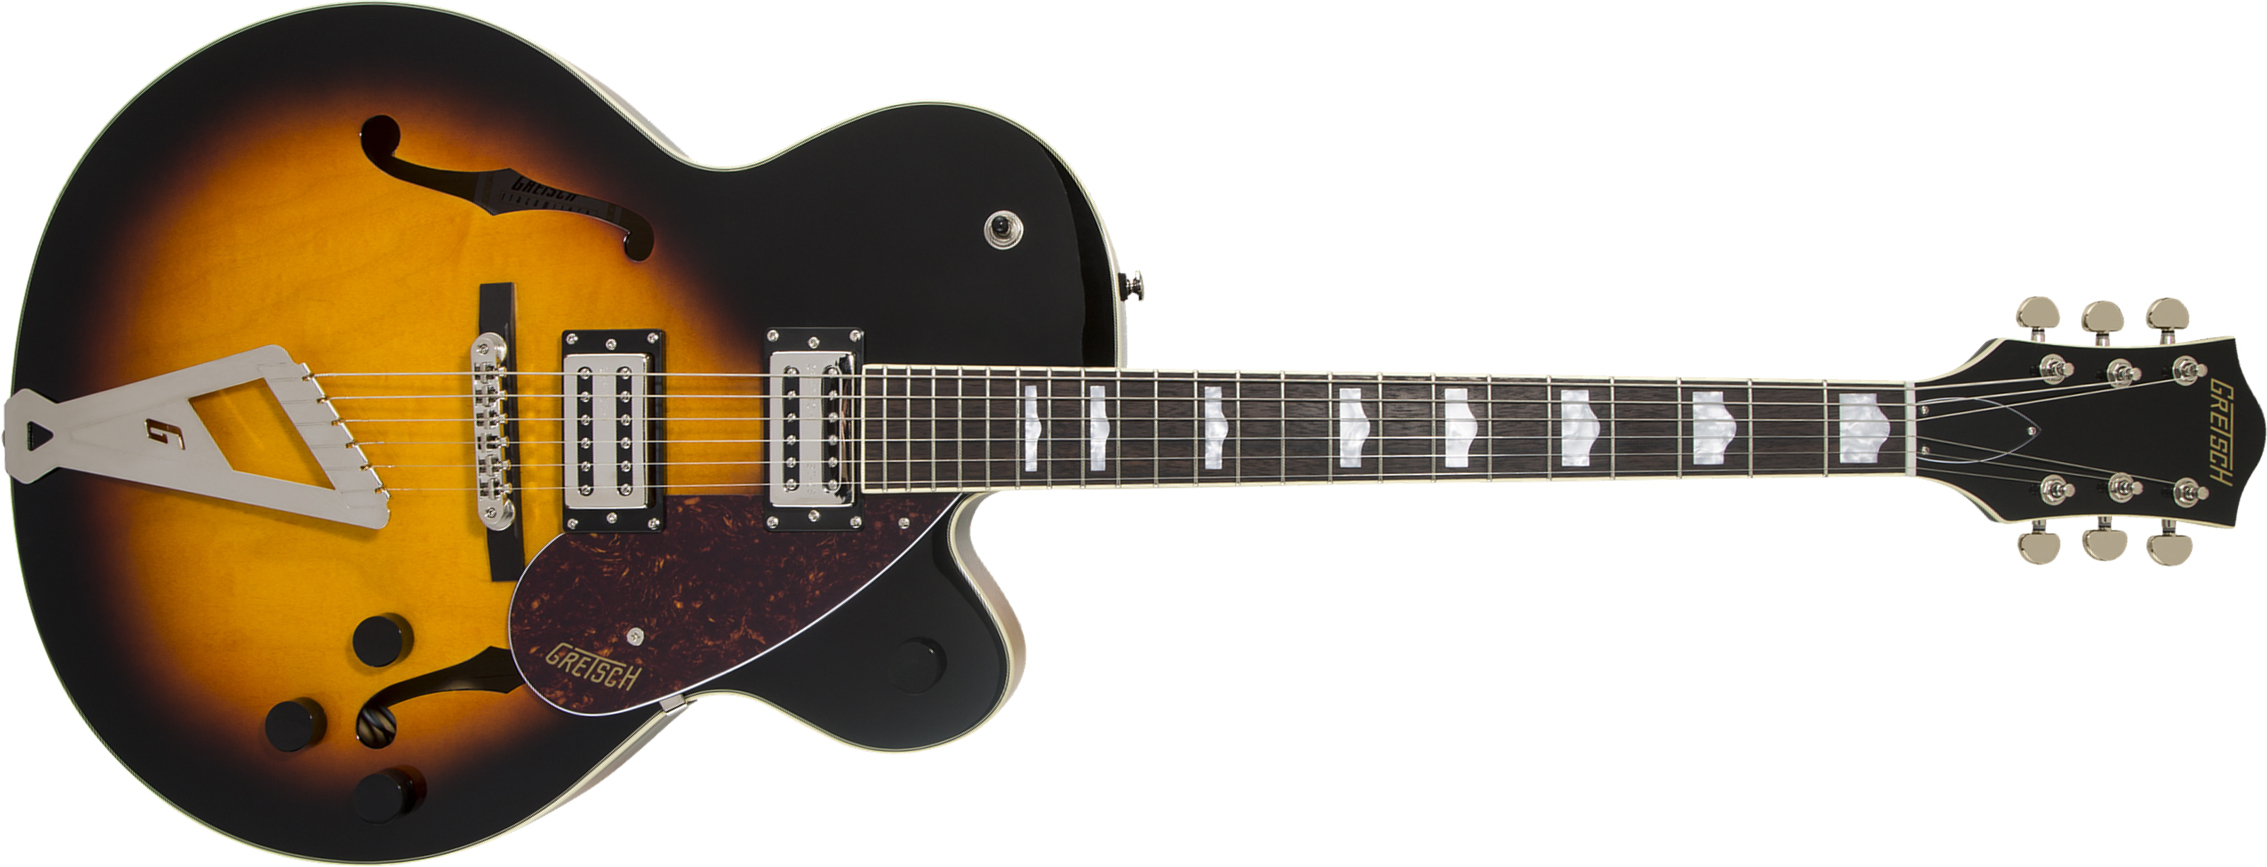 Gretsch G2420 Streamliner Hollow Body With Chromatic Ii 2h Ht Lau - Aged Brooklyn Burst - Semi-hollow electric guitar - Main picture